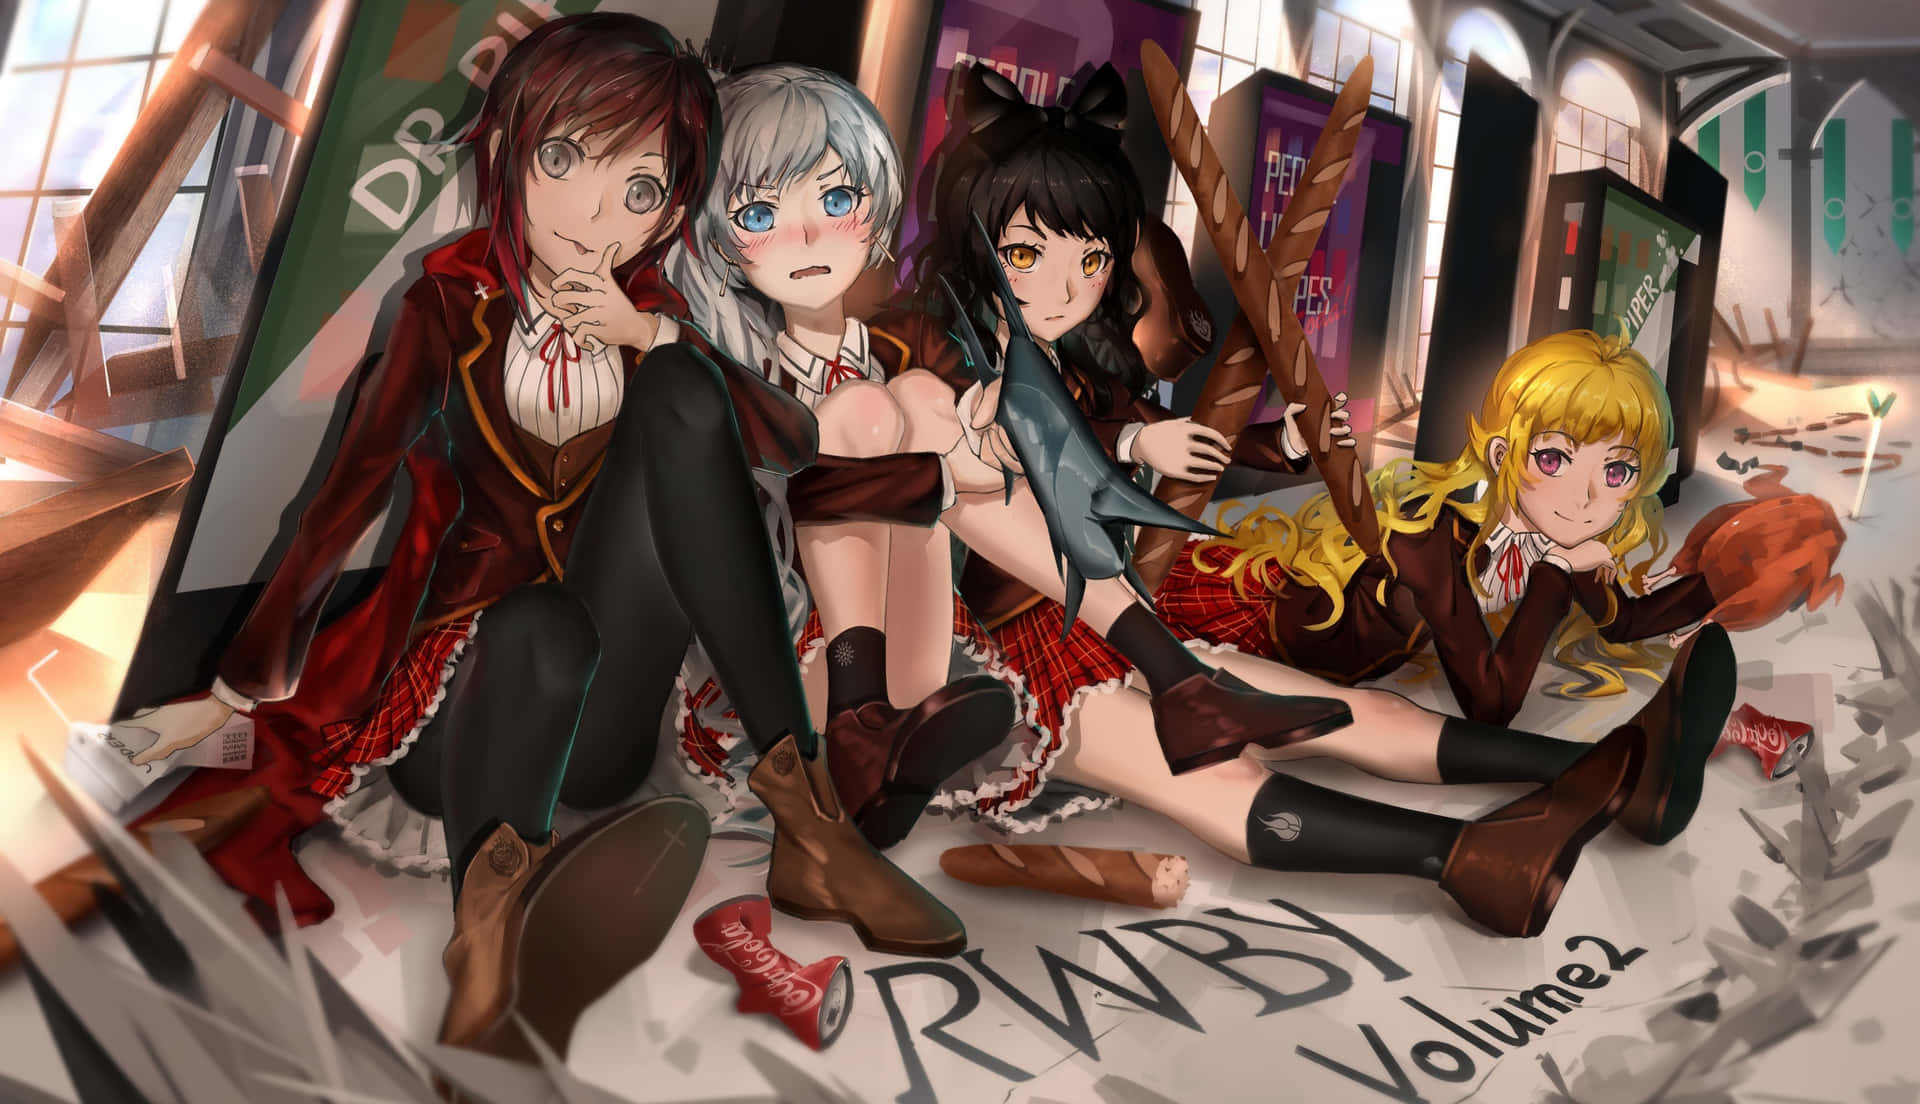 An intense fight scene with the mighty Rwby team fighting against the ruthless villains